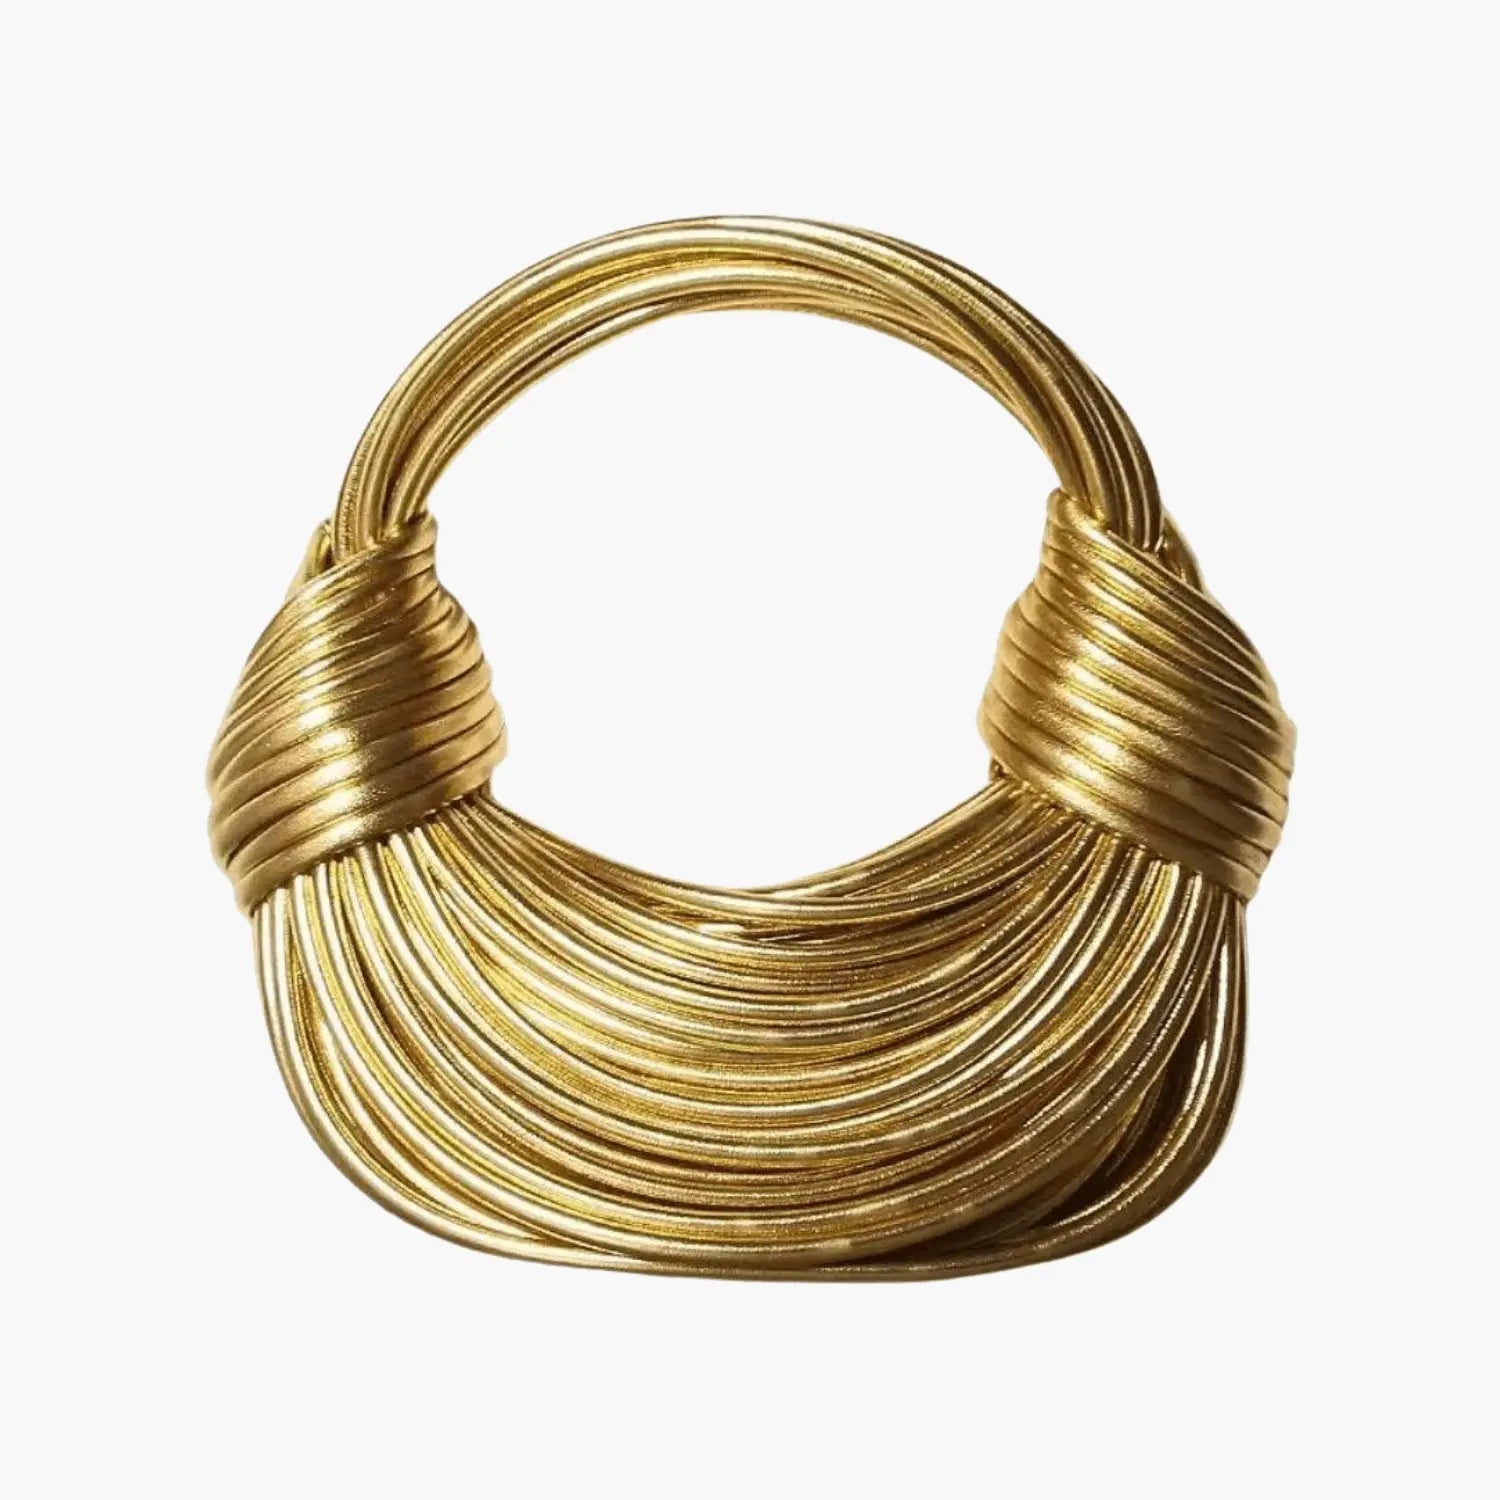 Immortal Collection™ Luxury Gold Handwoven Noodle Rope Handbag - EVERRD USA